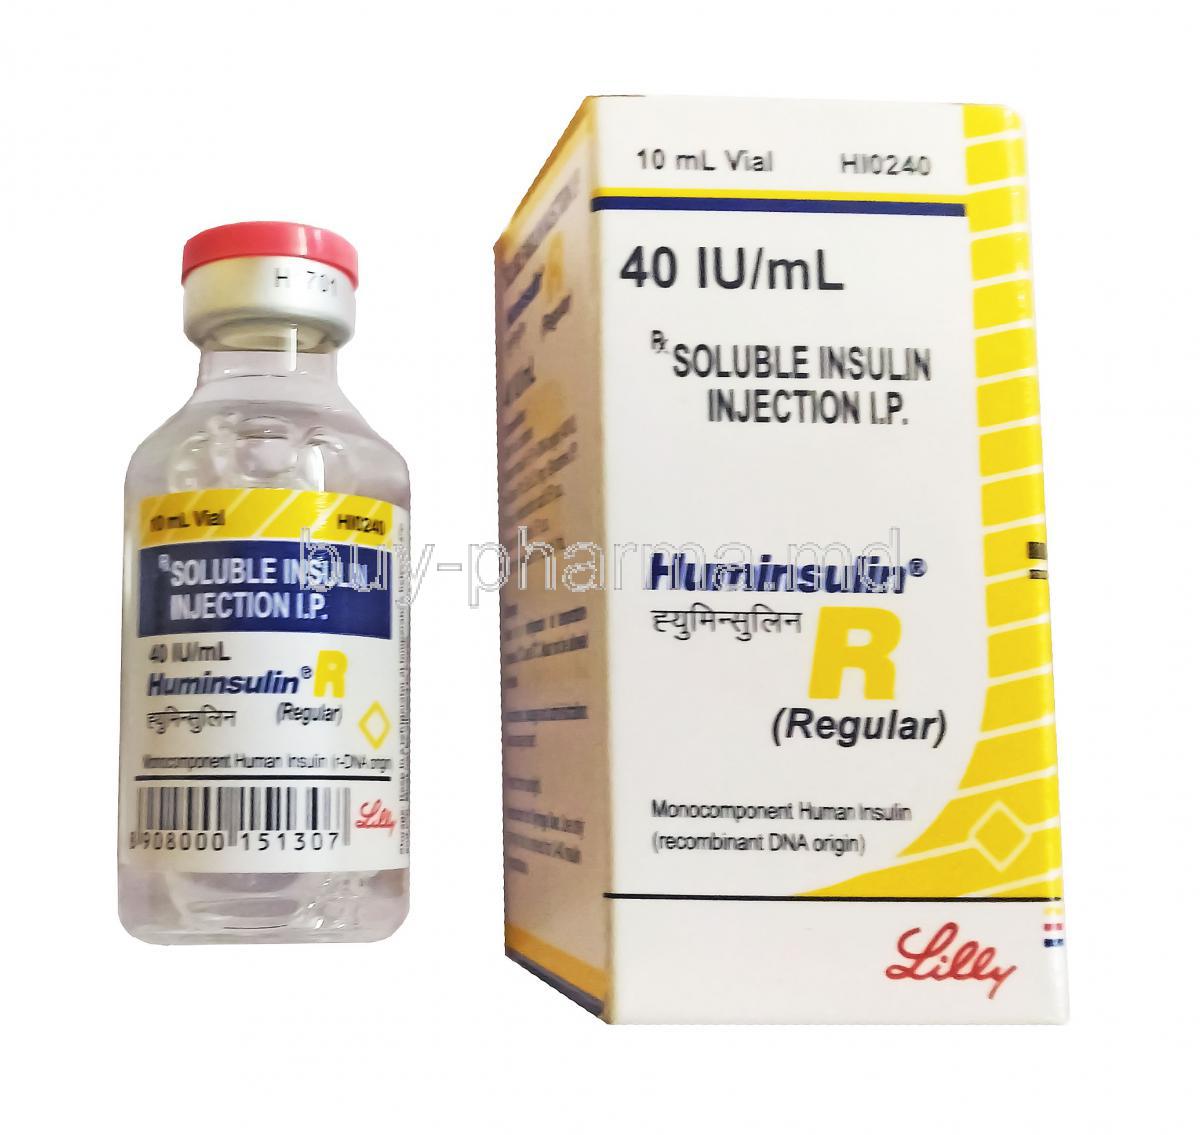 Univia-R Soluble Insulin Injection